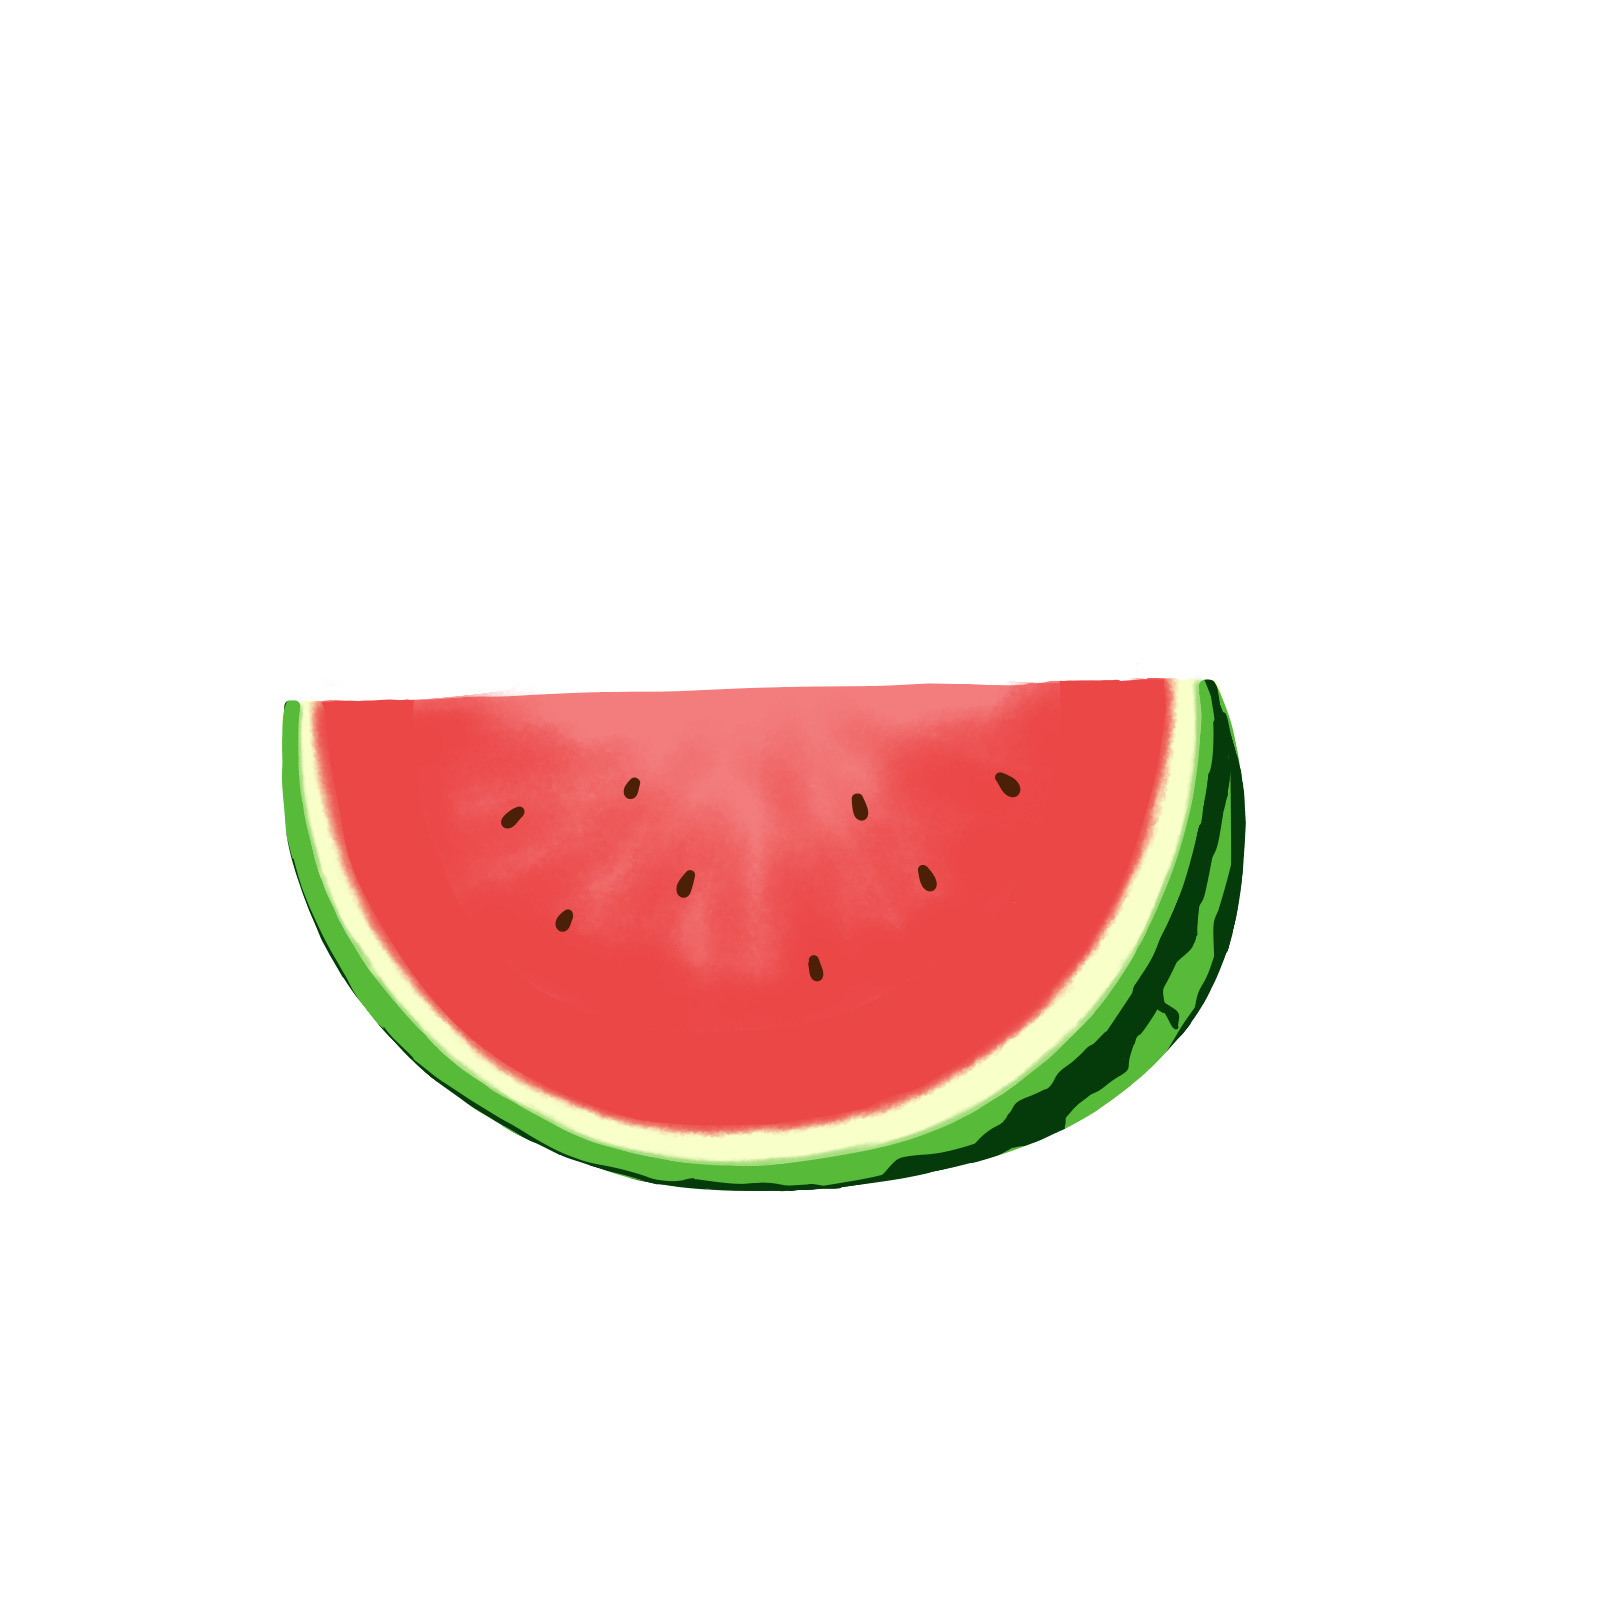 How to Draw Watermelon Easy / DRAWING WATERMELON / Watermelon Coloring / Drawing  Watermelon 🍉 - YouTube